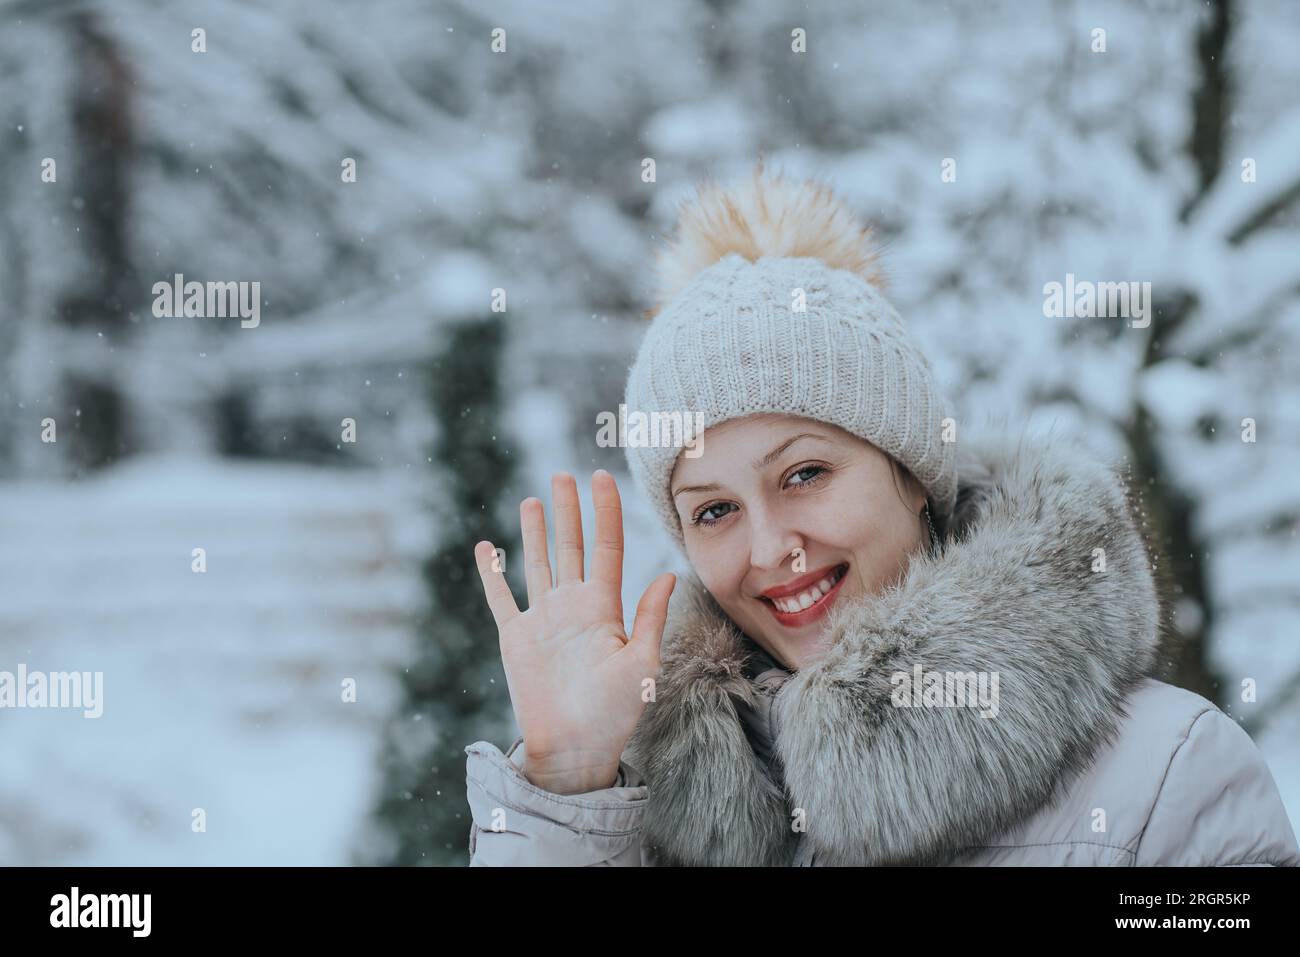 Young woman in warm winter clothing waving her hand Stock Photo